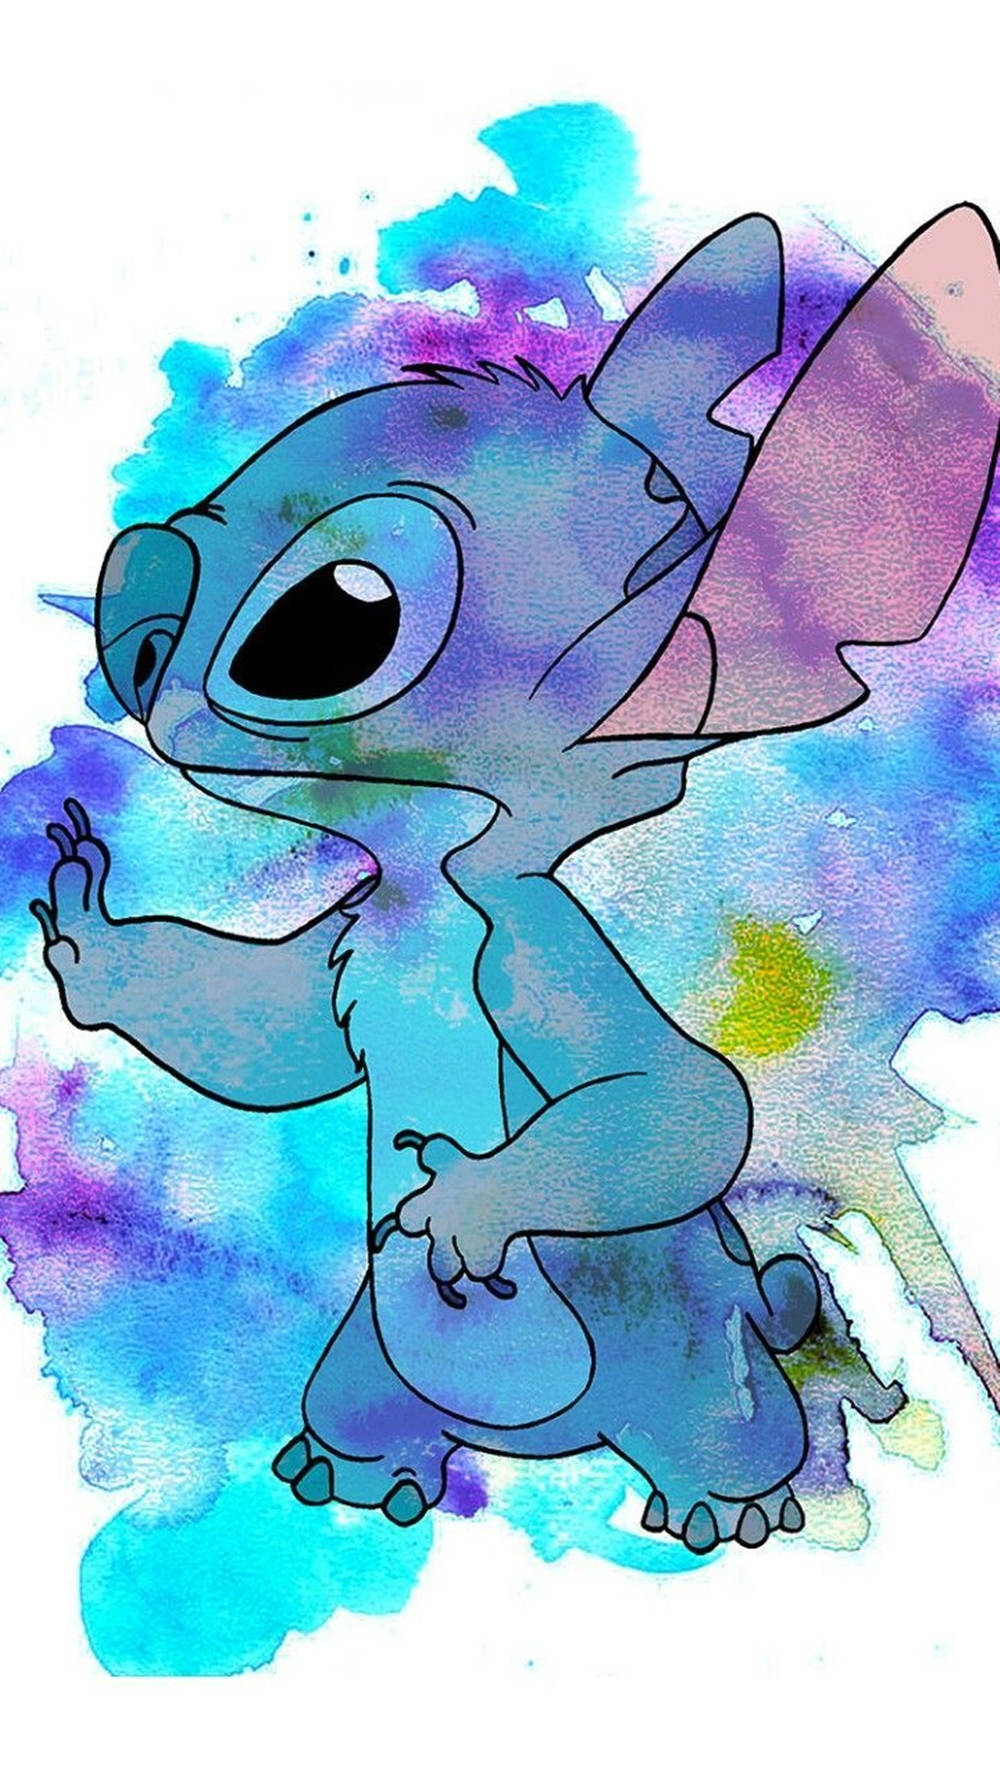 Adorable Stitch Iphone Wallpaper Background